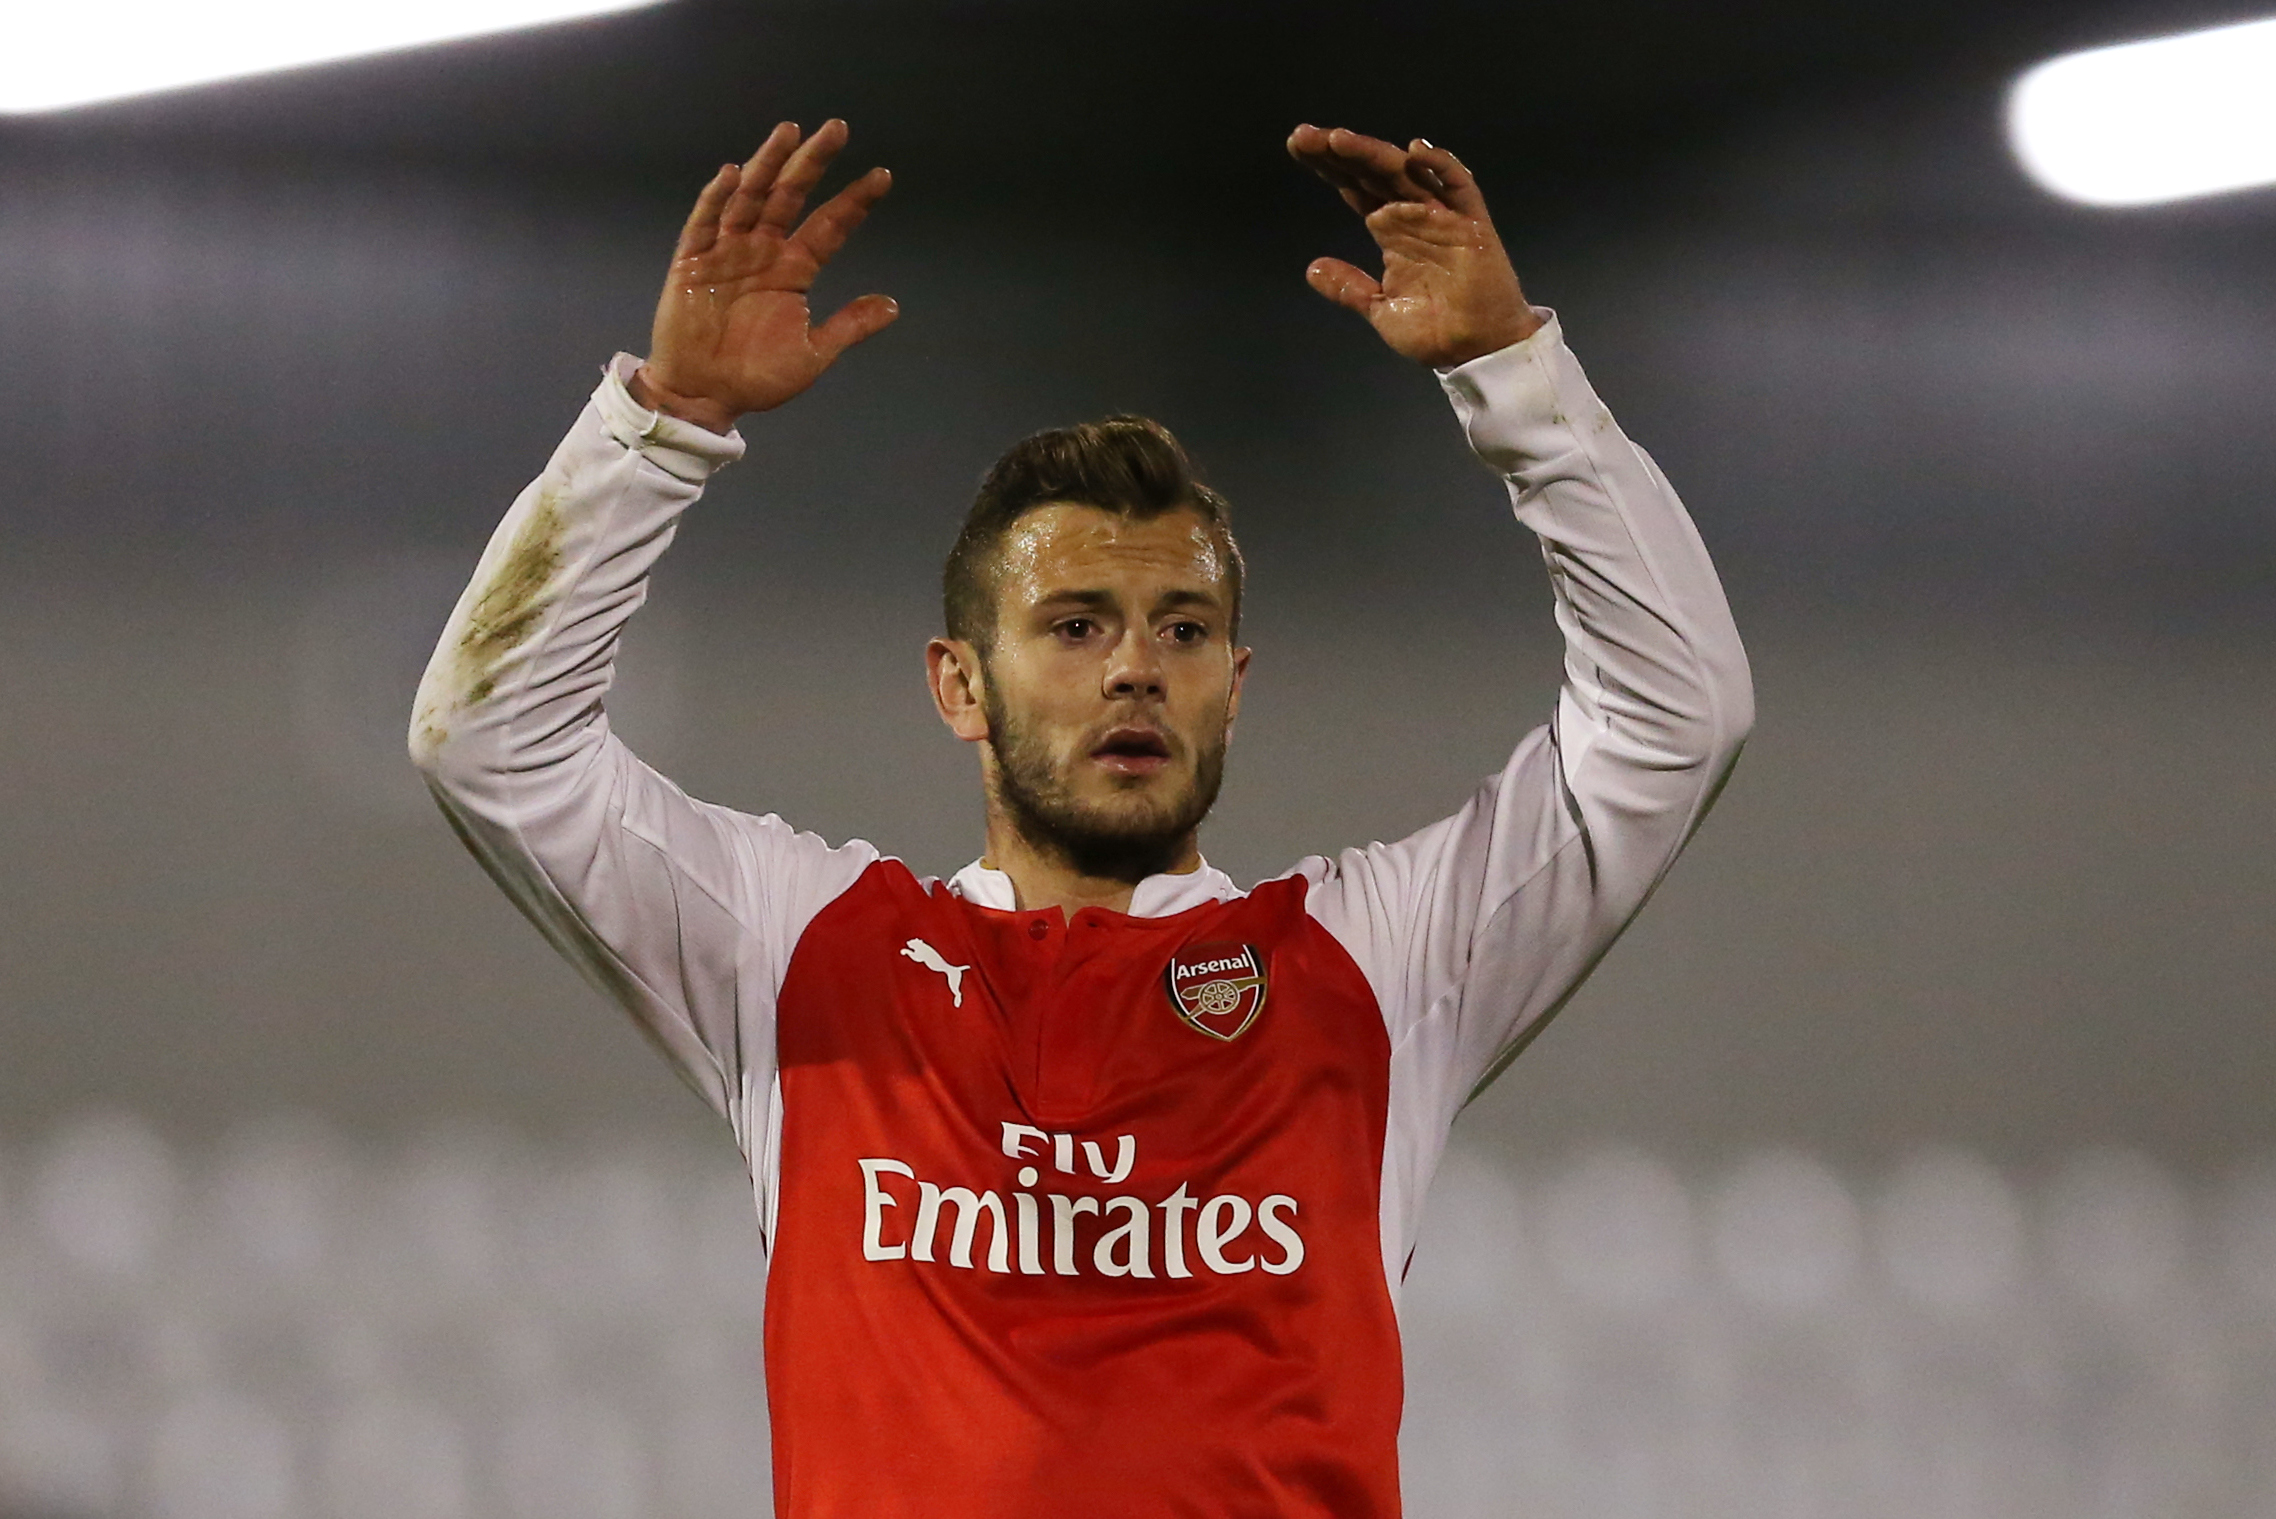 Wilshere not ready for West Brom but could face Sunderland